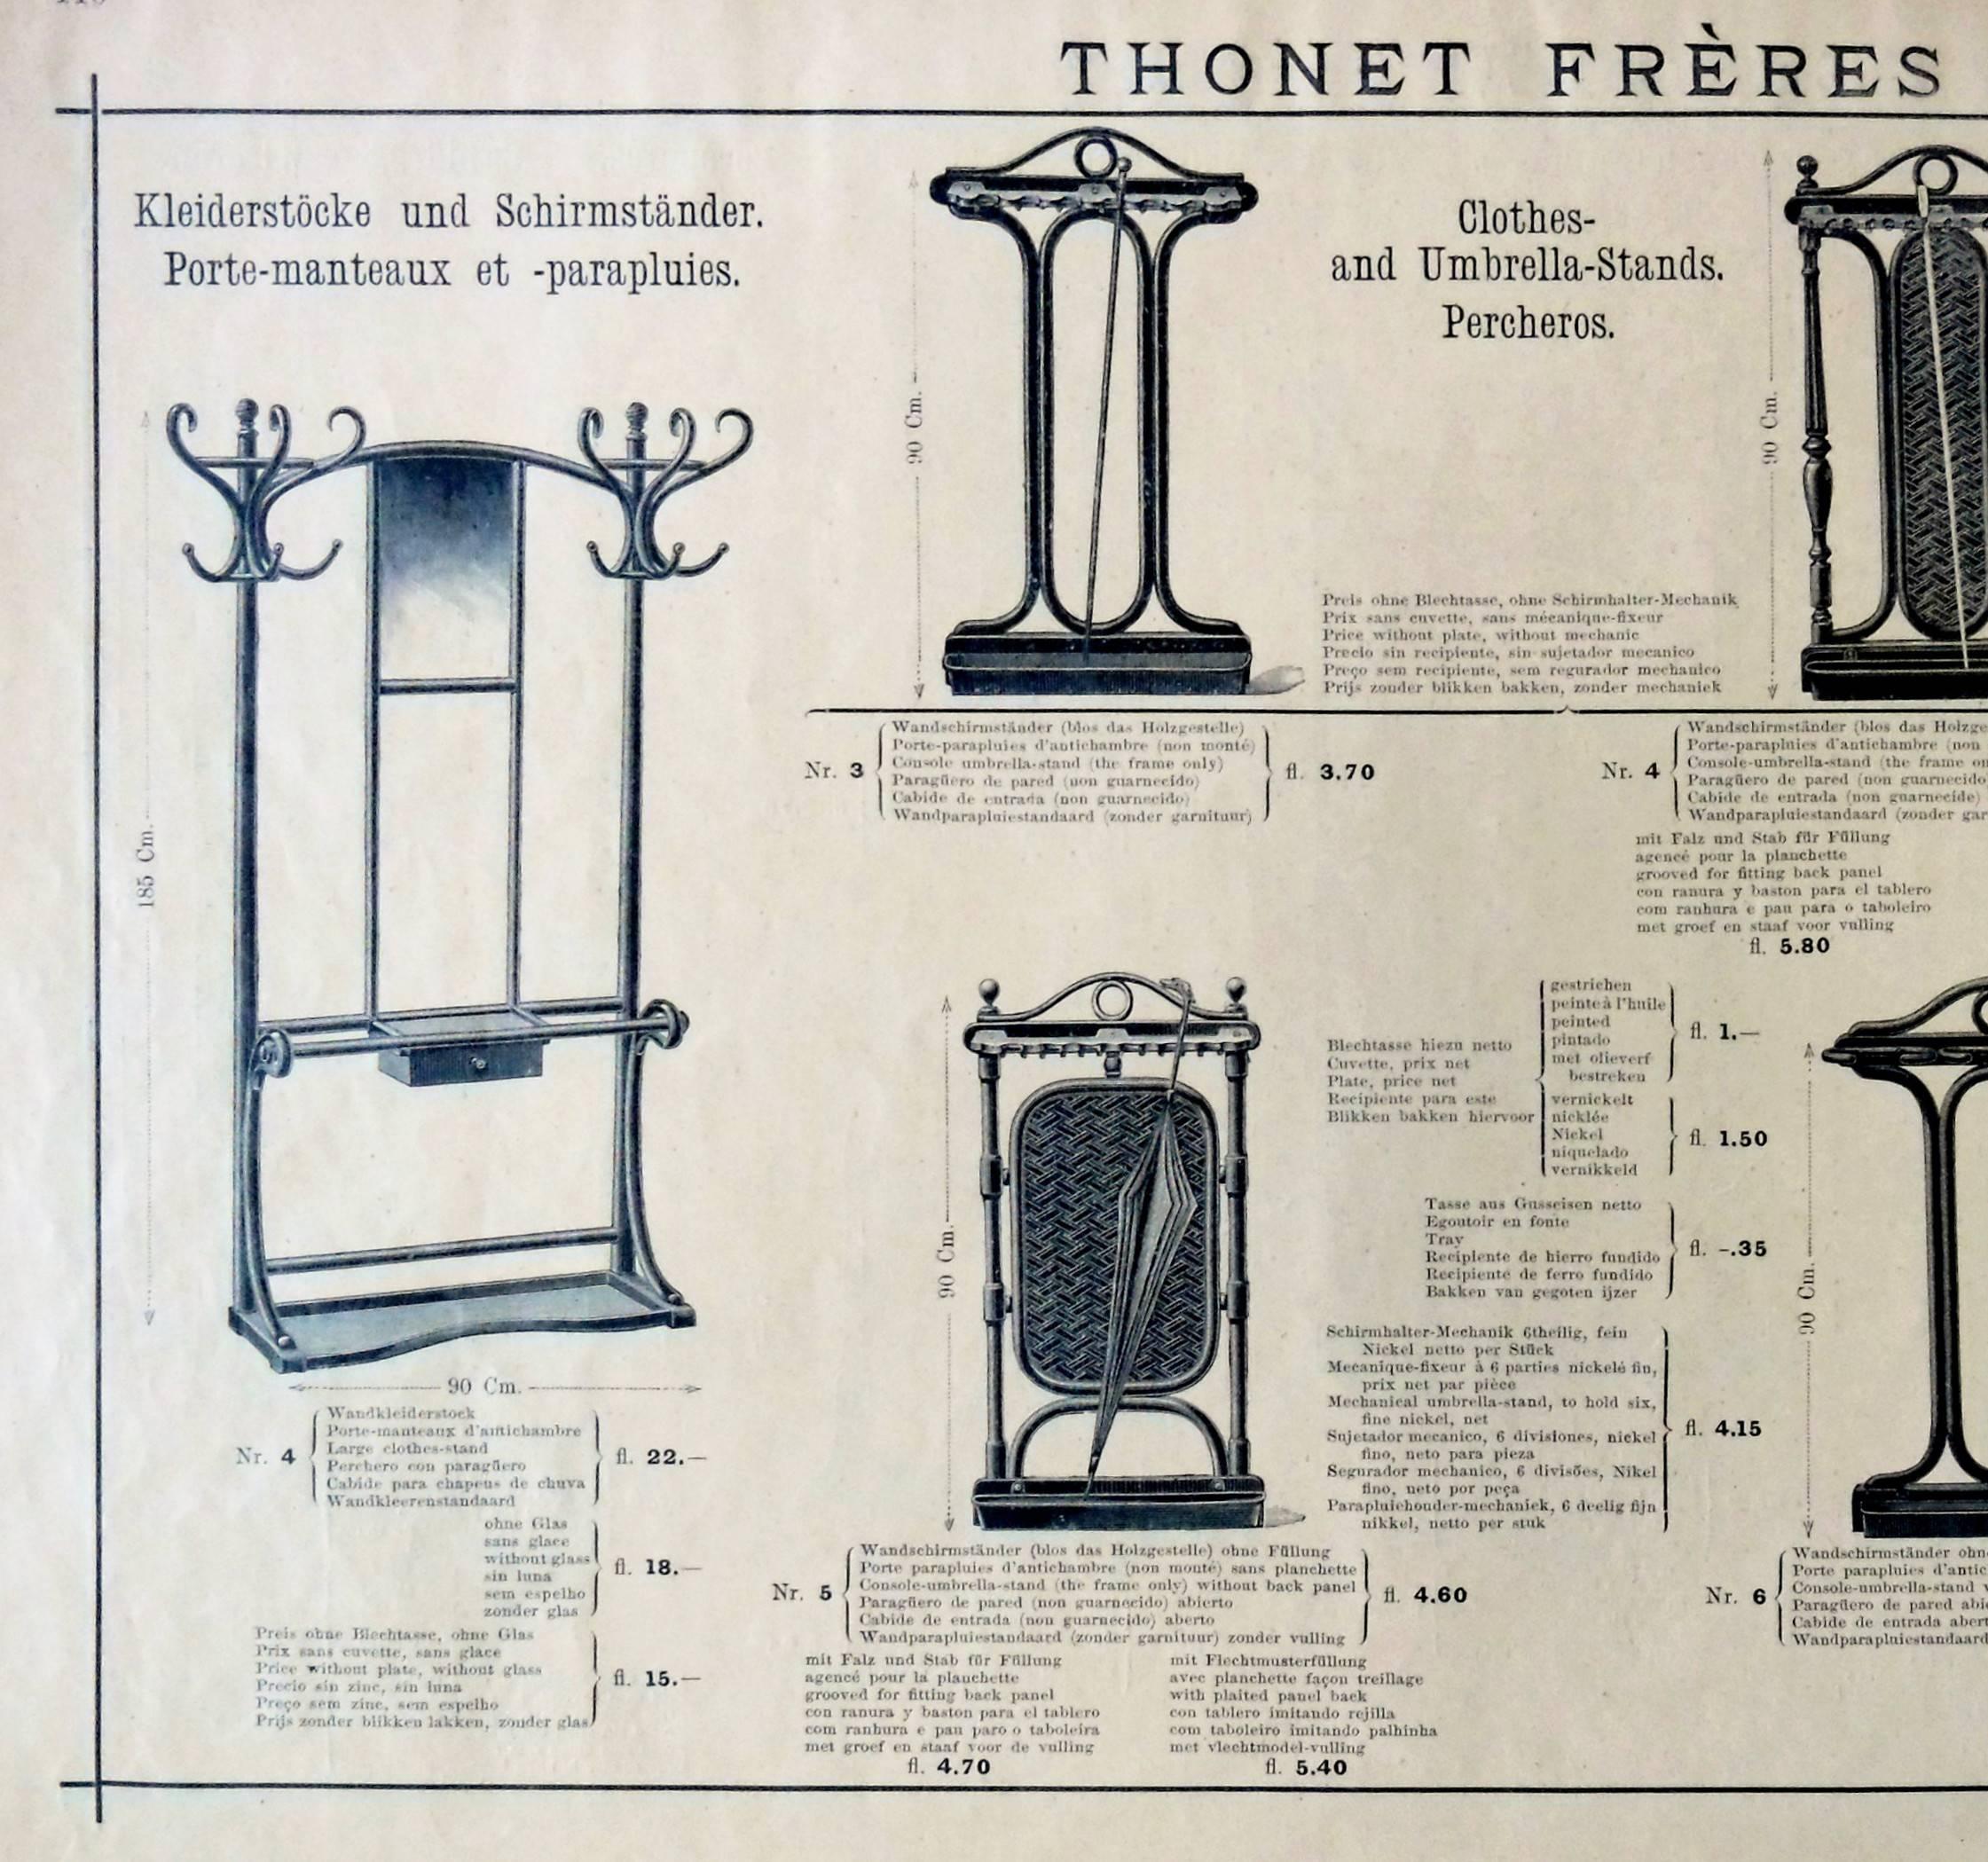 Late 19th Century Large Clothes-Stand Thonet Nr.4, circa 1899